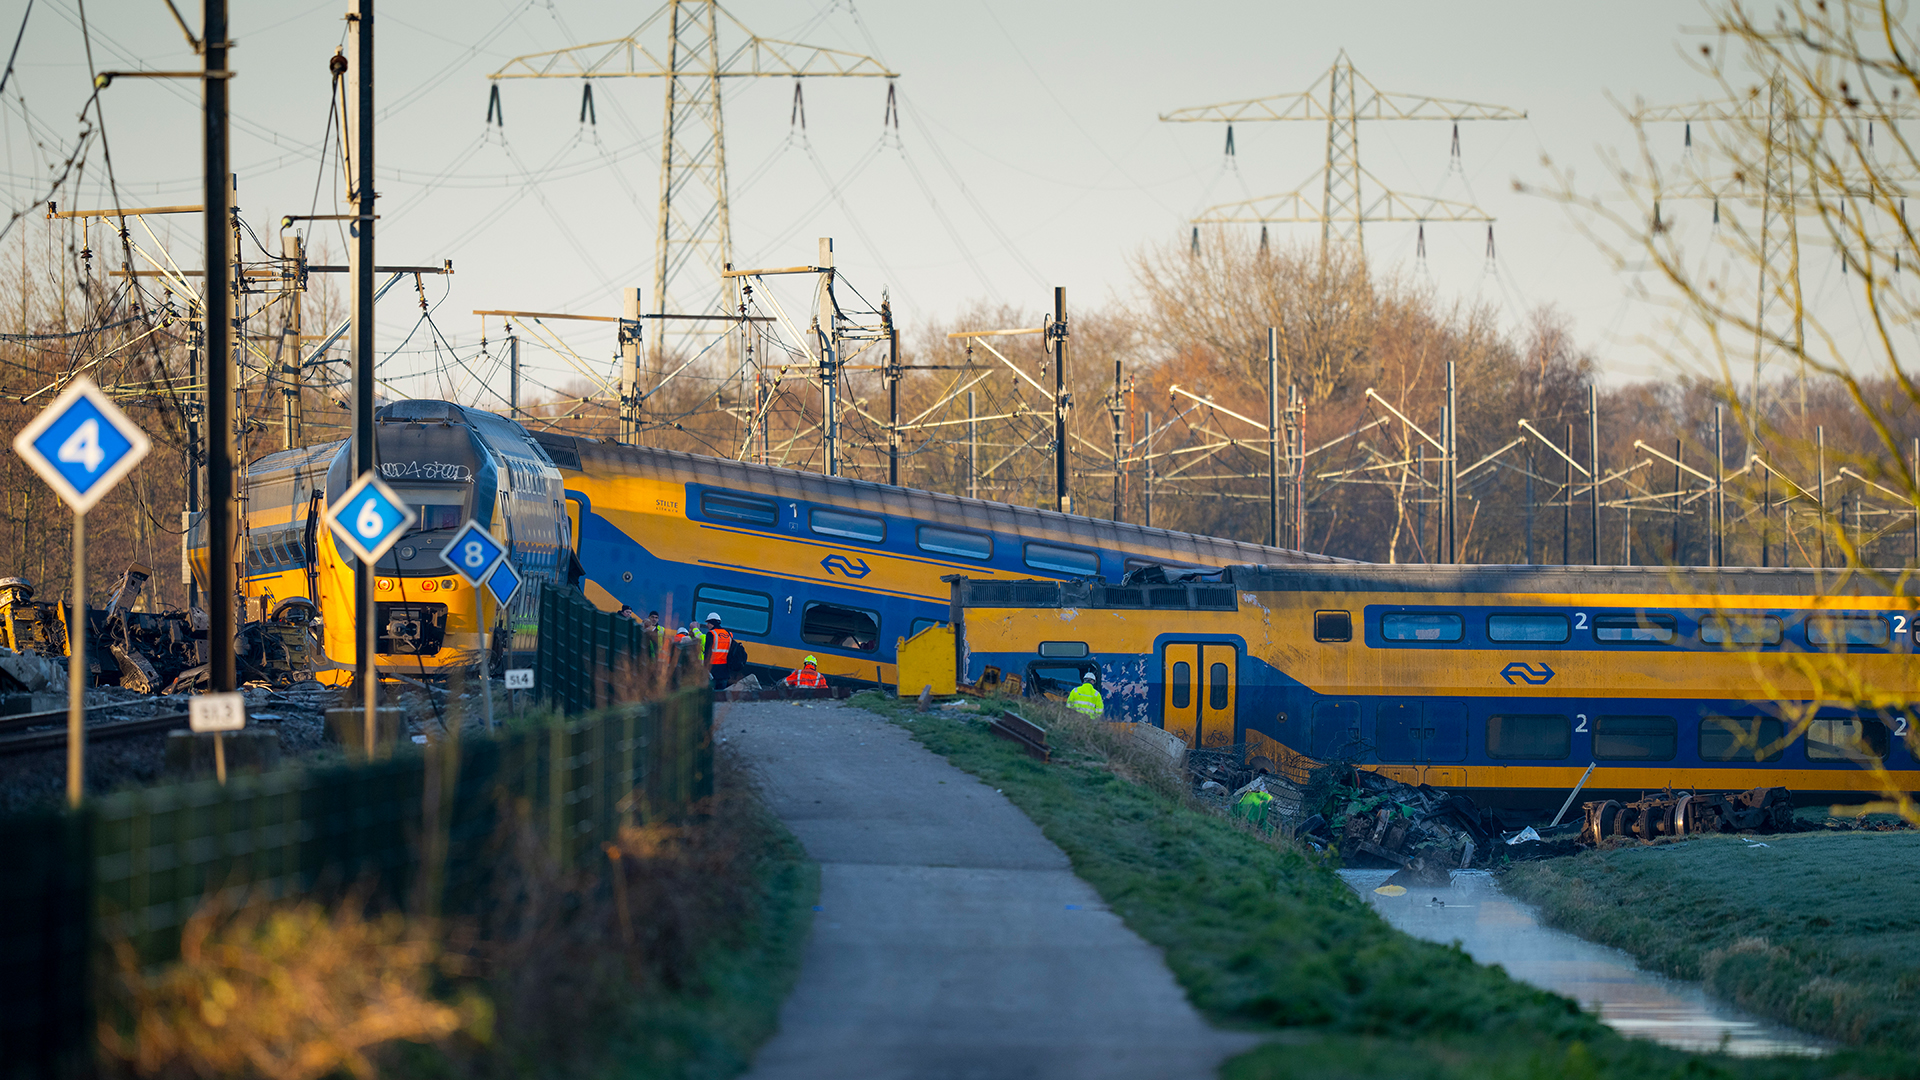 One dead and several injured: a serious train accident in the Netherlands